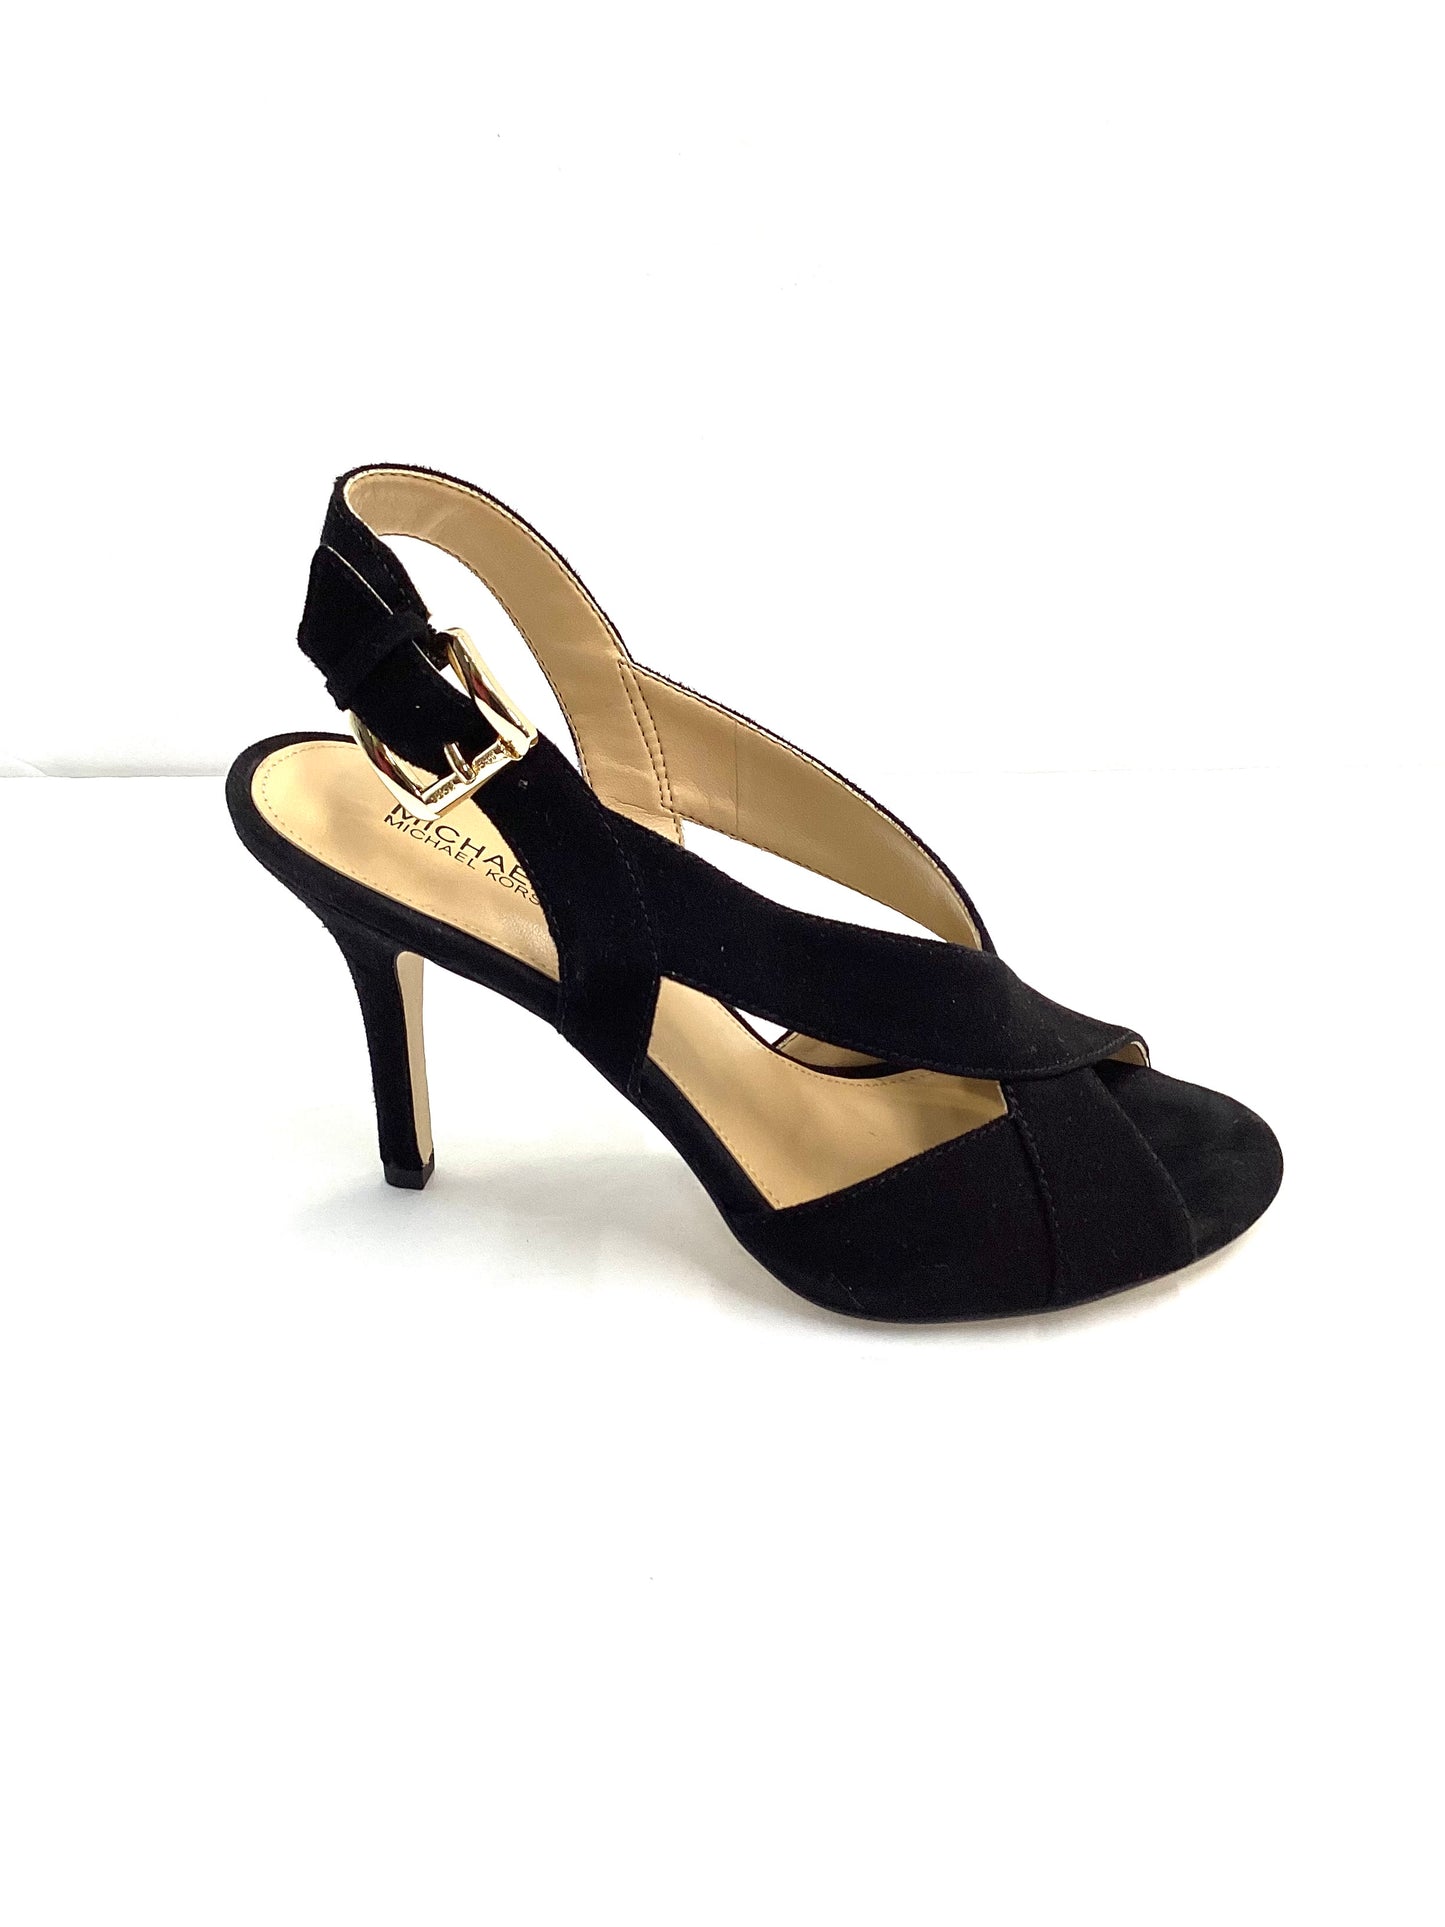 Shoes Heels Stiletto By Michael Kors  Size: 6.5